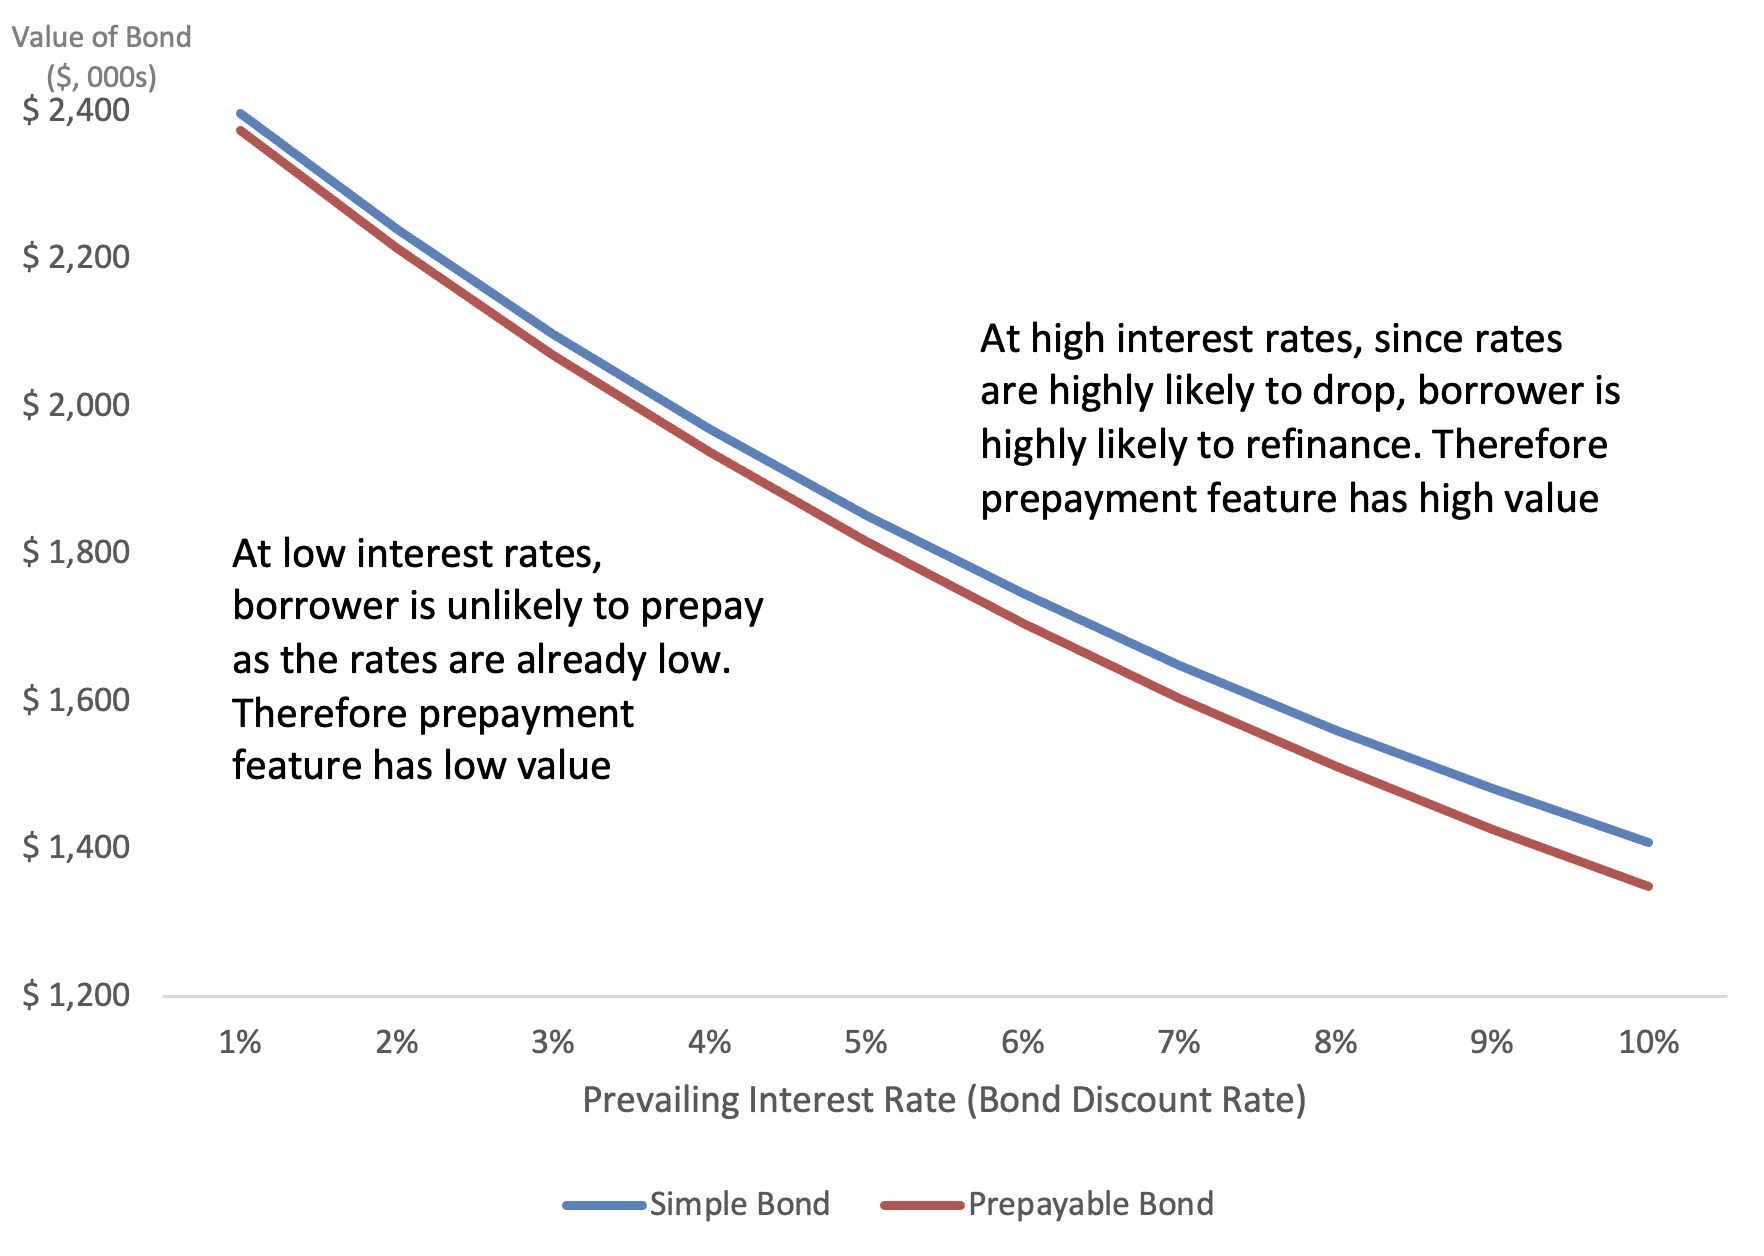 Figure 6: Value of Fixed Coupon Bond vs. Interest Rates